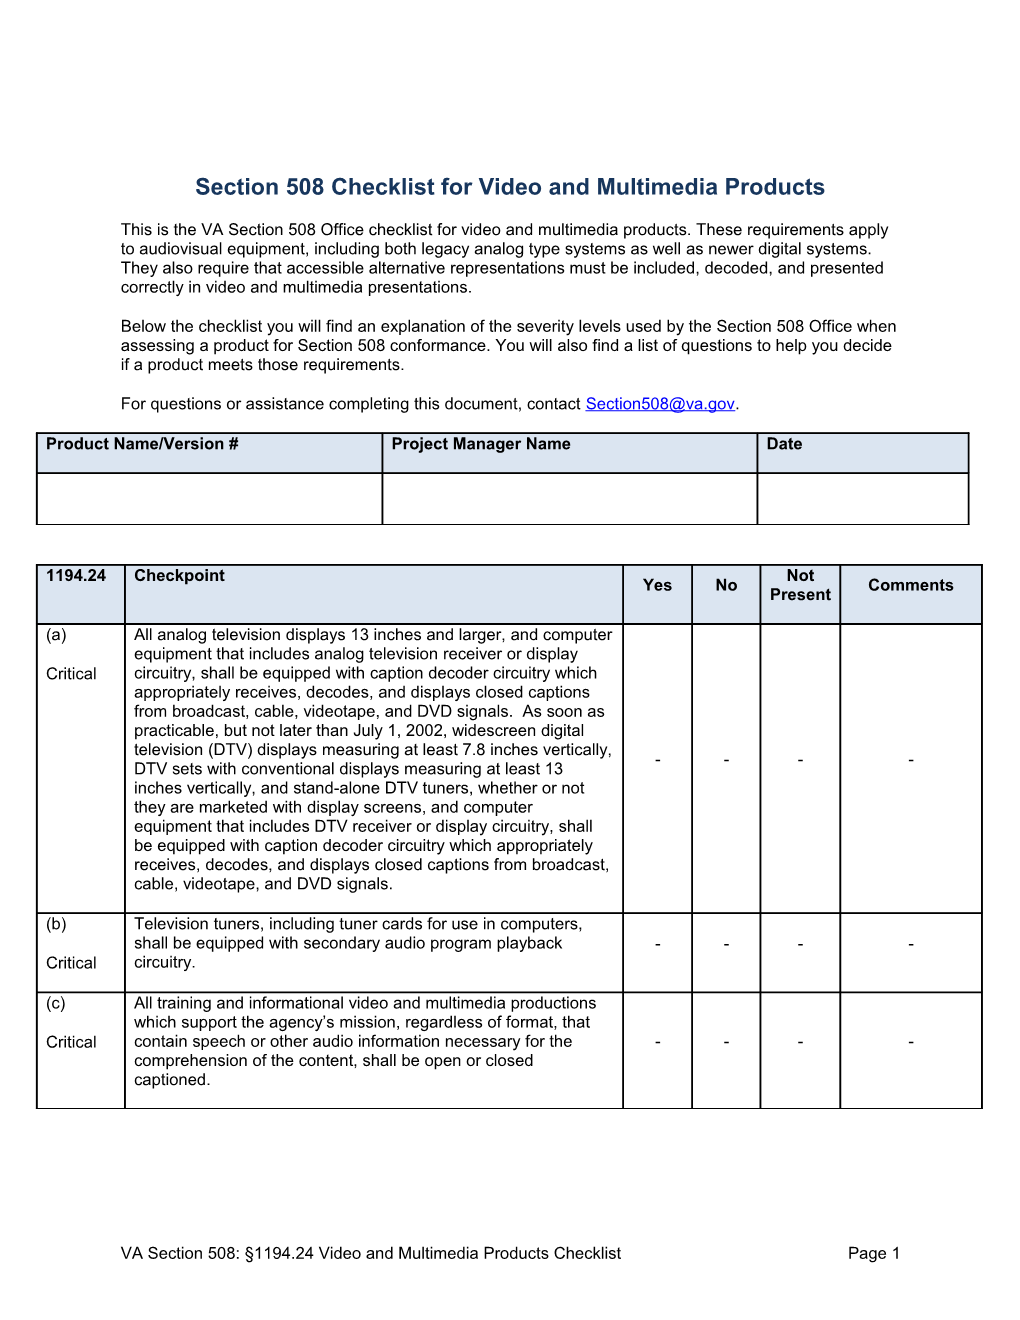 Section 508 Checklist For Video And Multimedia Products